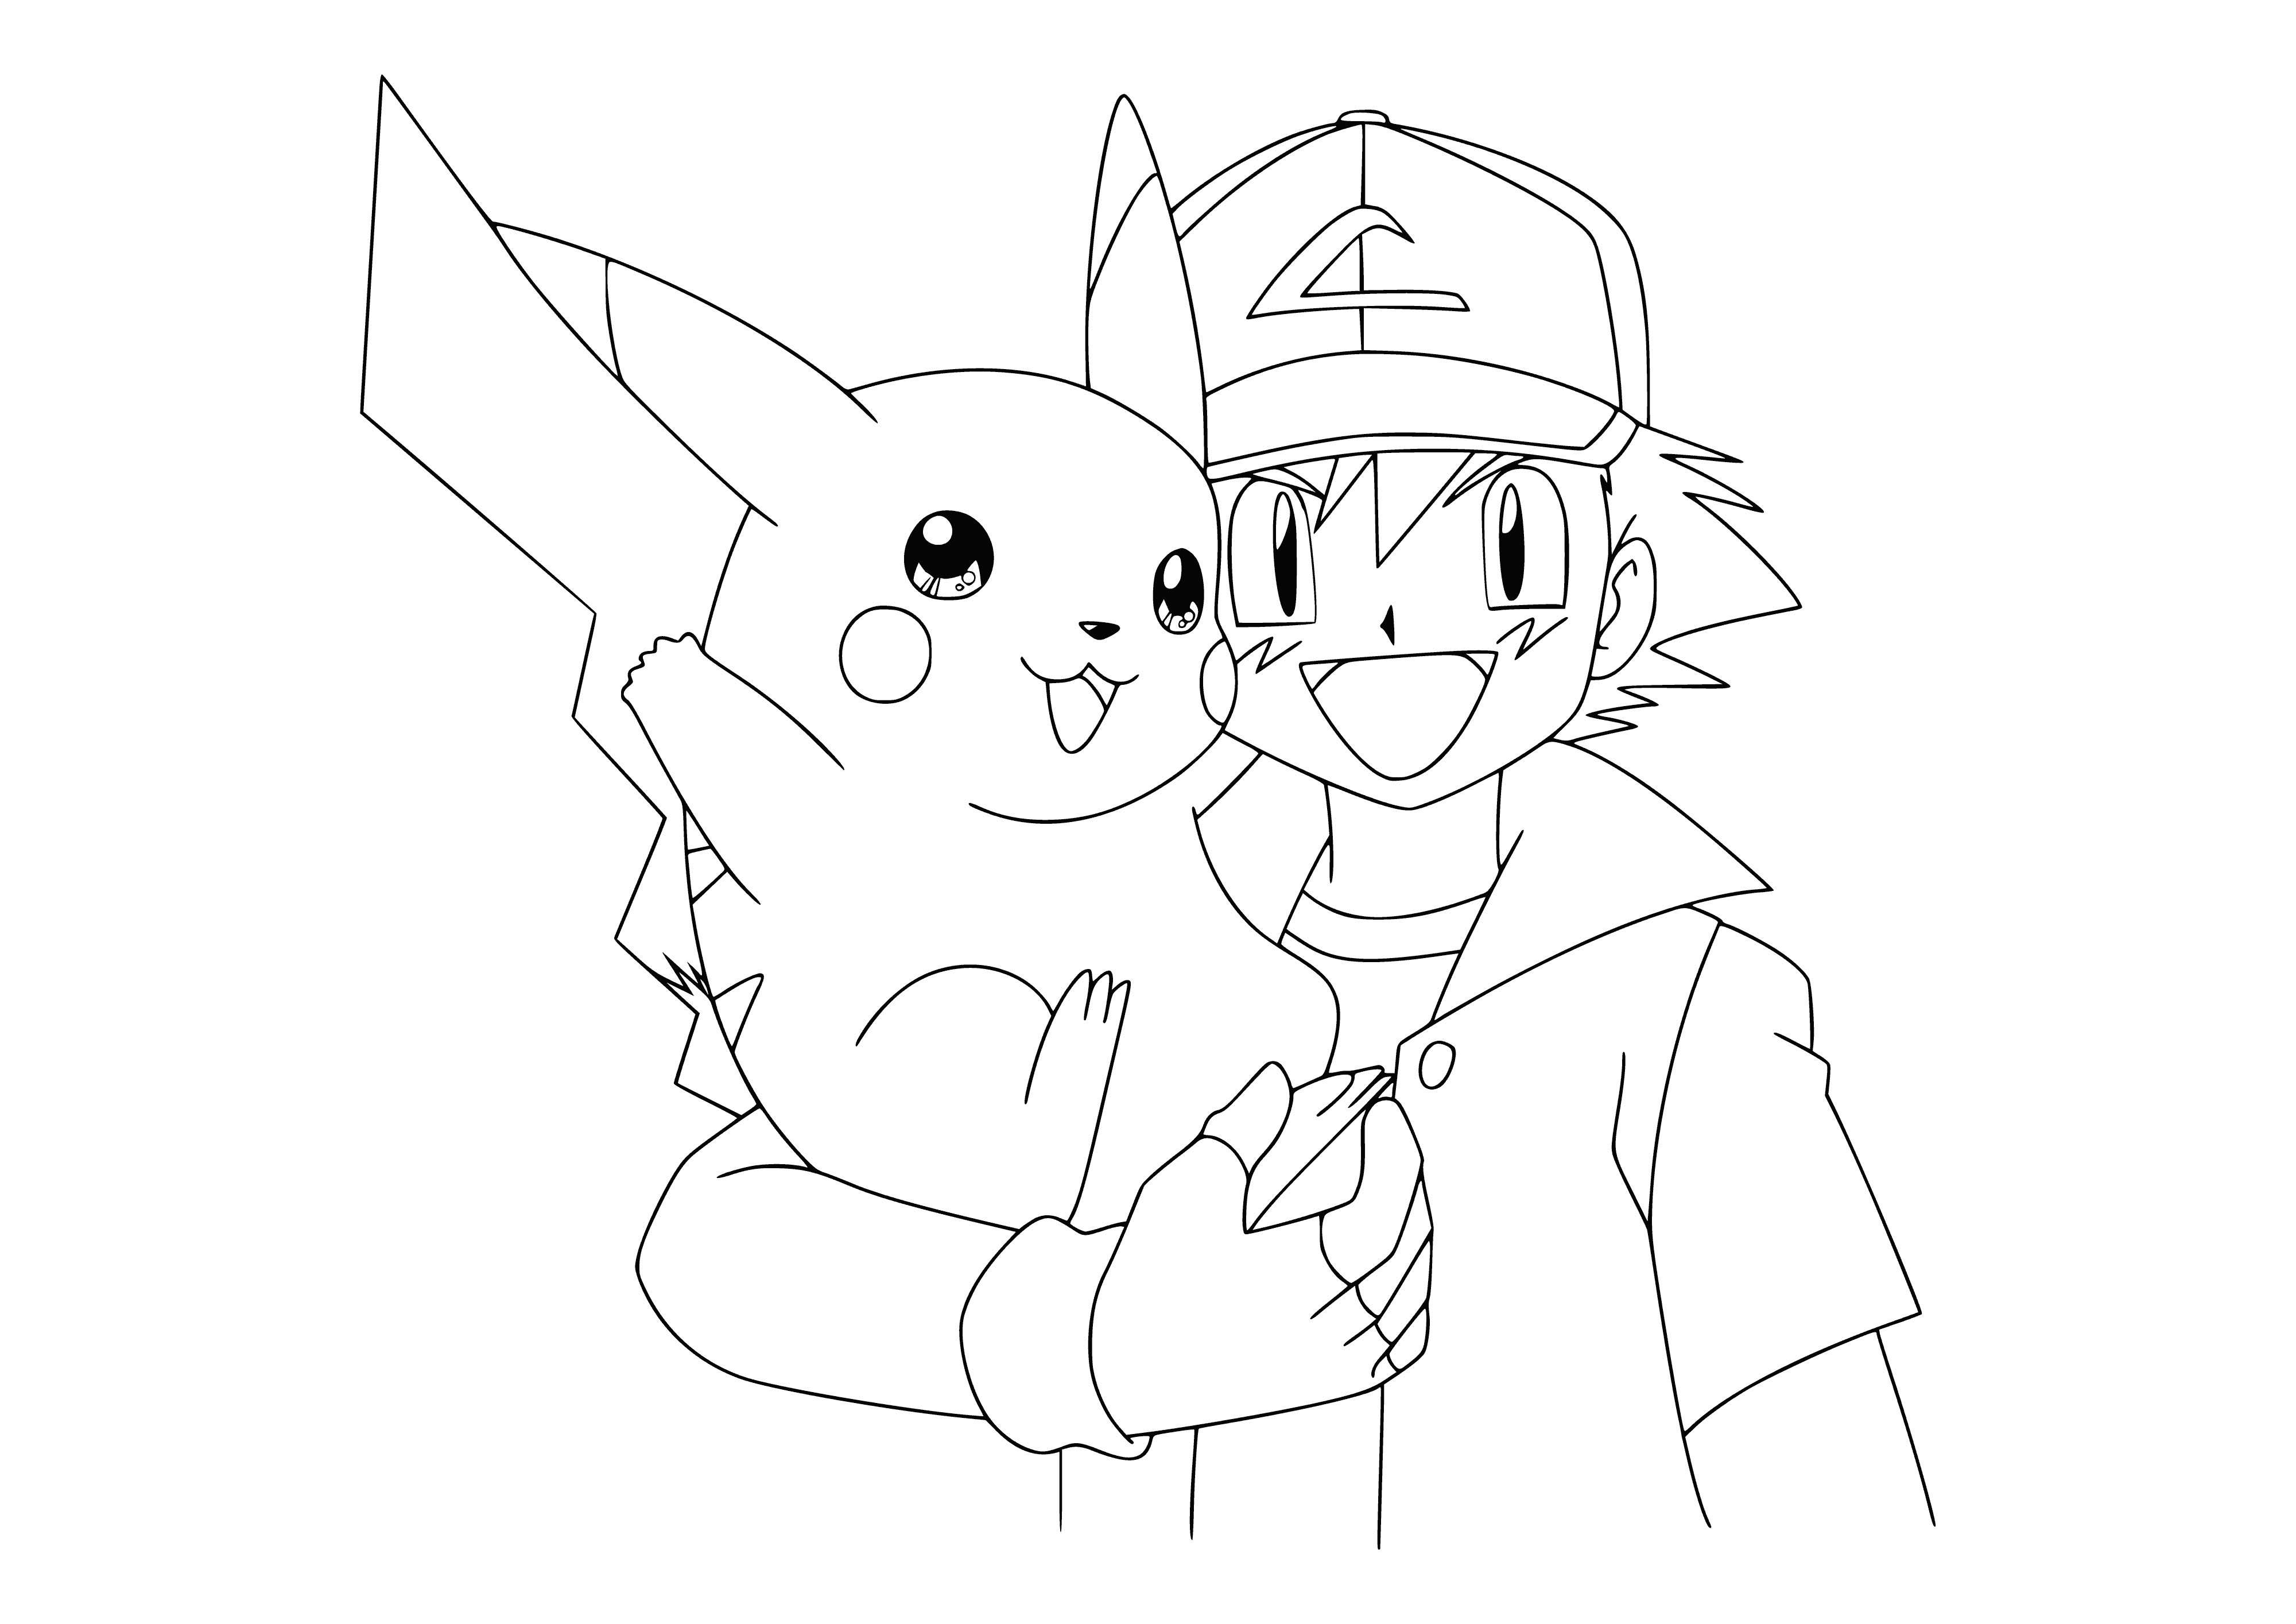 coloring page: Ash and Pikachu color together, looking into each other's eyes affectionately.